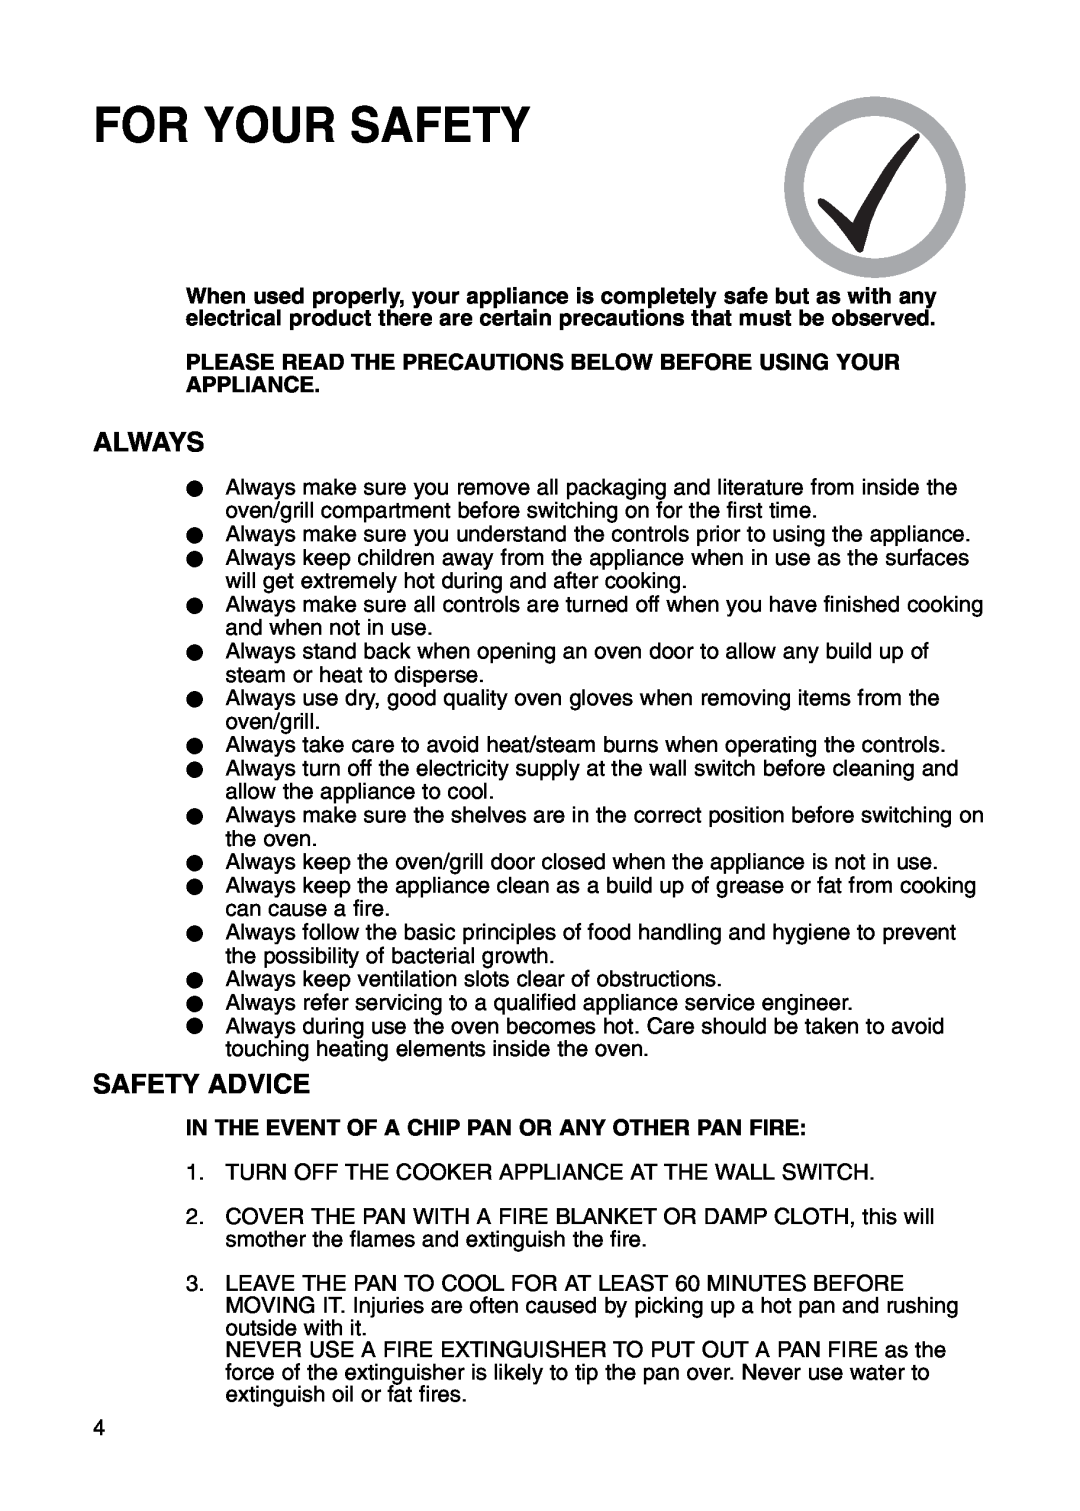 Hotpoint BS41X manual For Your Safety, Always, Safety Advice 